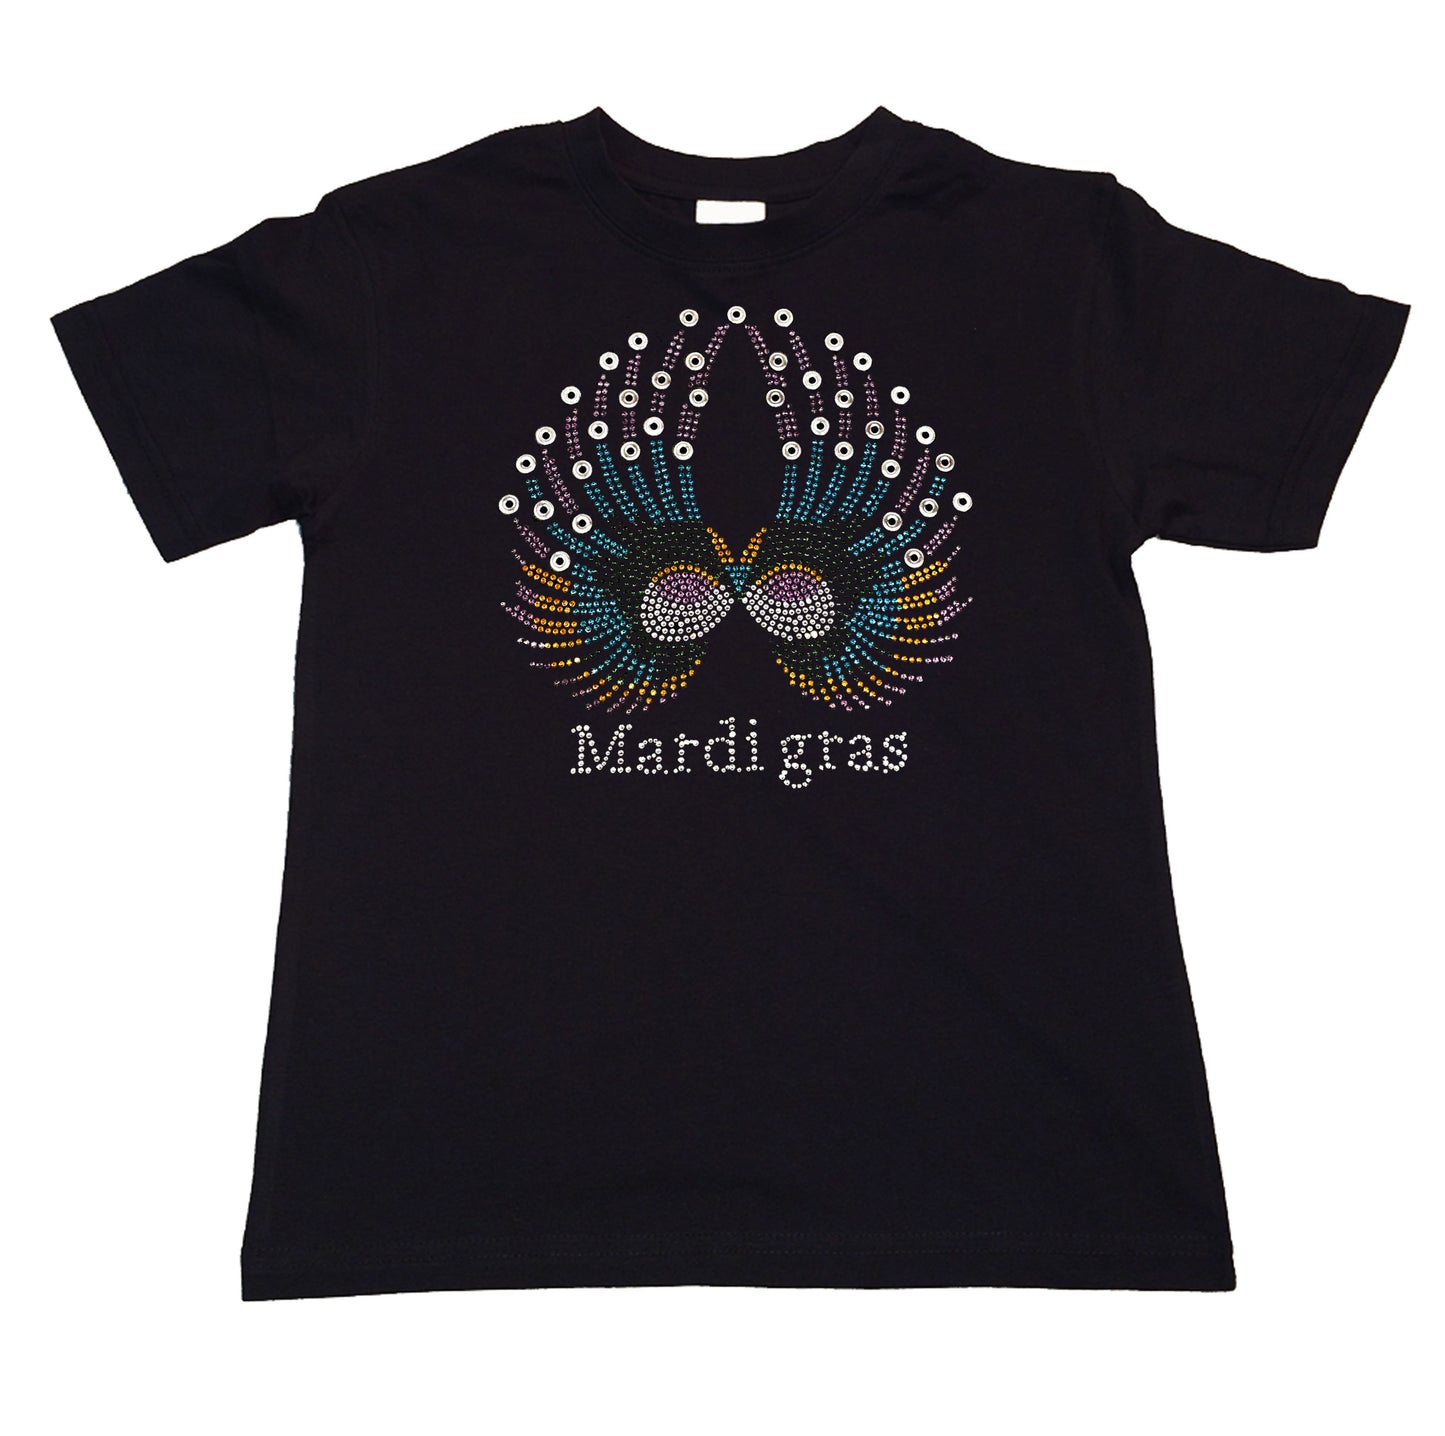 Girls Rhinestone T-Shirt " Colorful Mardi Gras Wings in Rhinestone " Kids Size 3 to 14 Available